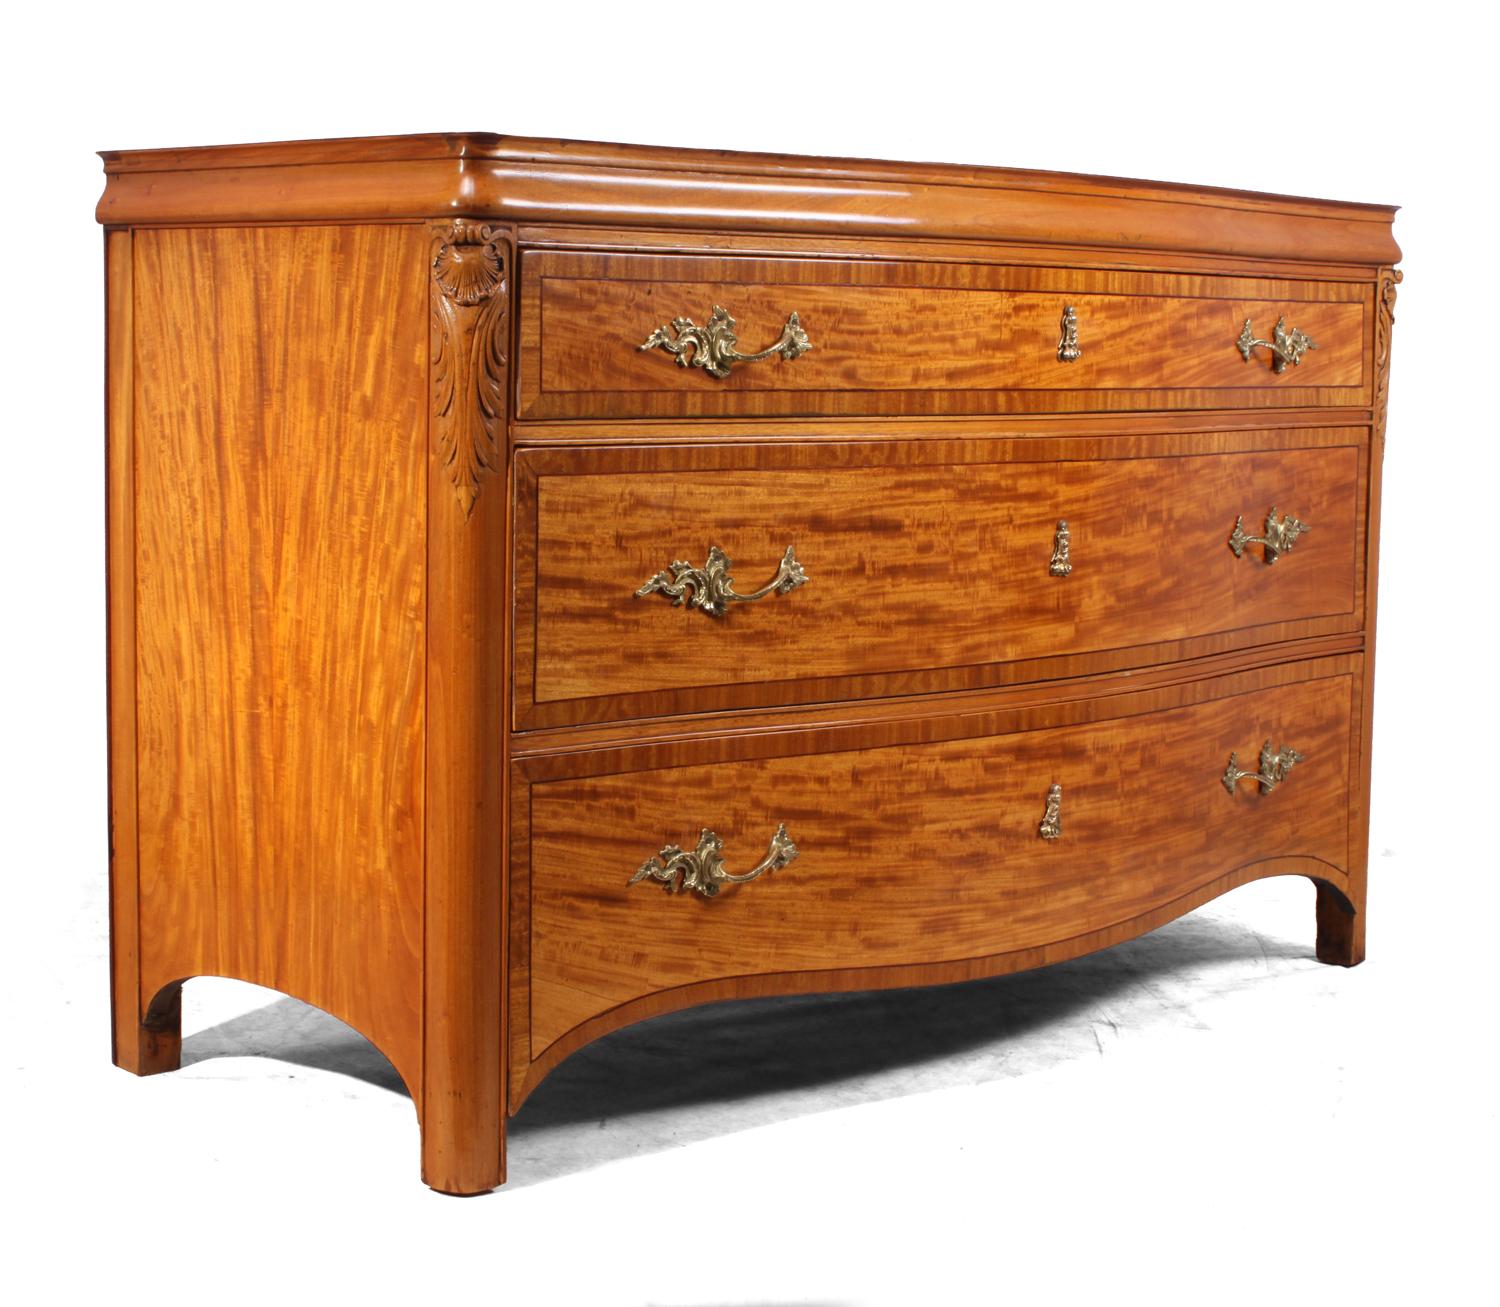 Antique Satinwood Serpentine Commode, circa 1890 In Excellent Condition For Sale In Paddock Wood, Kent